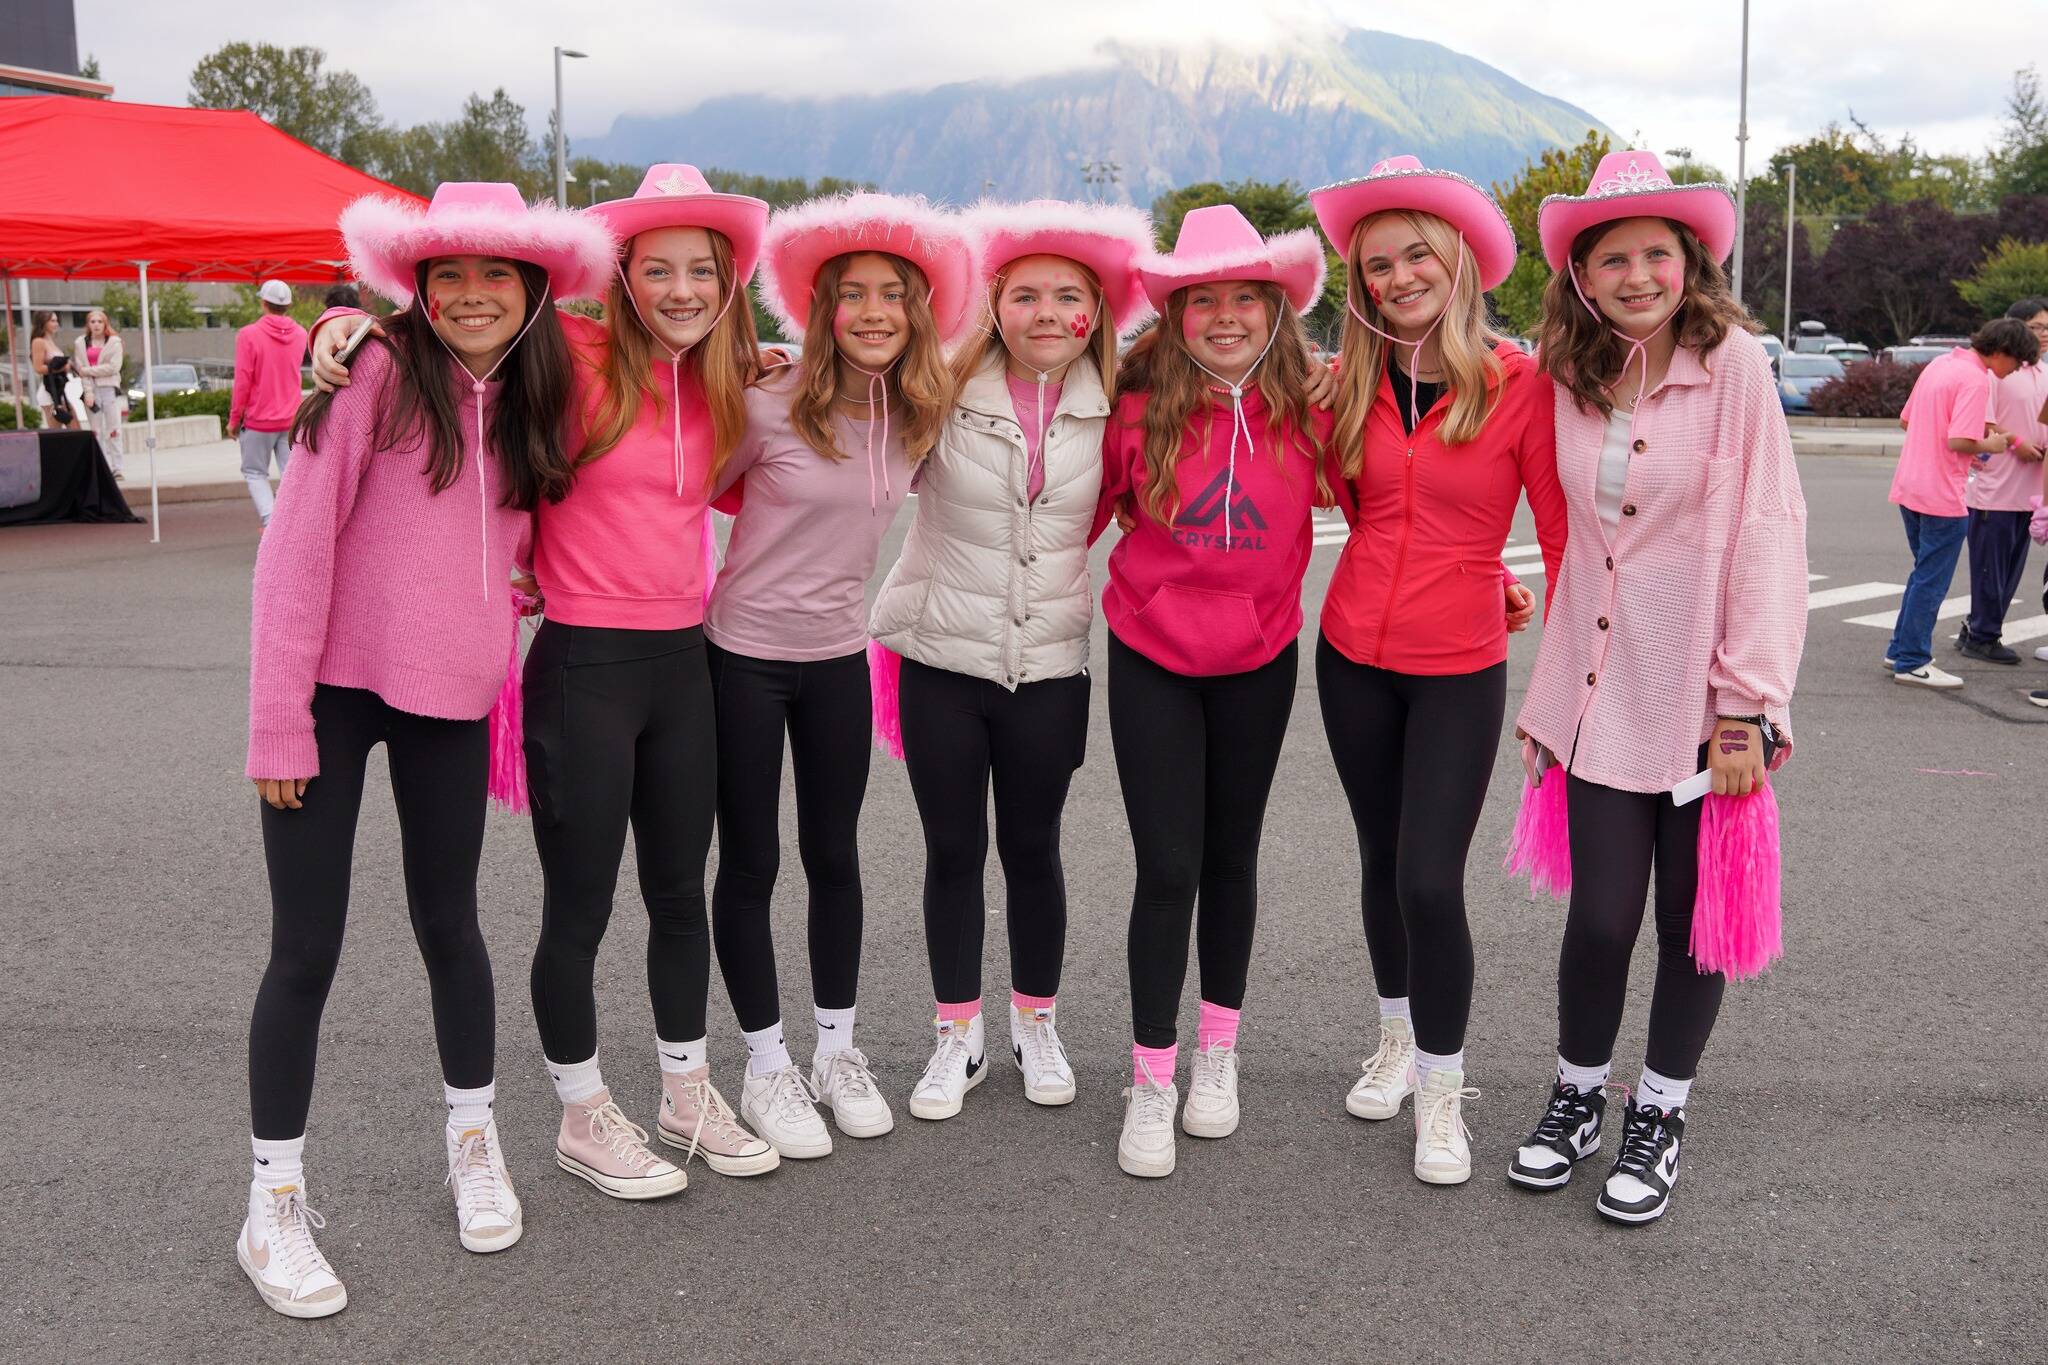 Mount Si High School students pose for a photo at their Homecoming Rally on Sept. 29. (Courtesy photo)